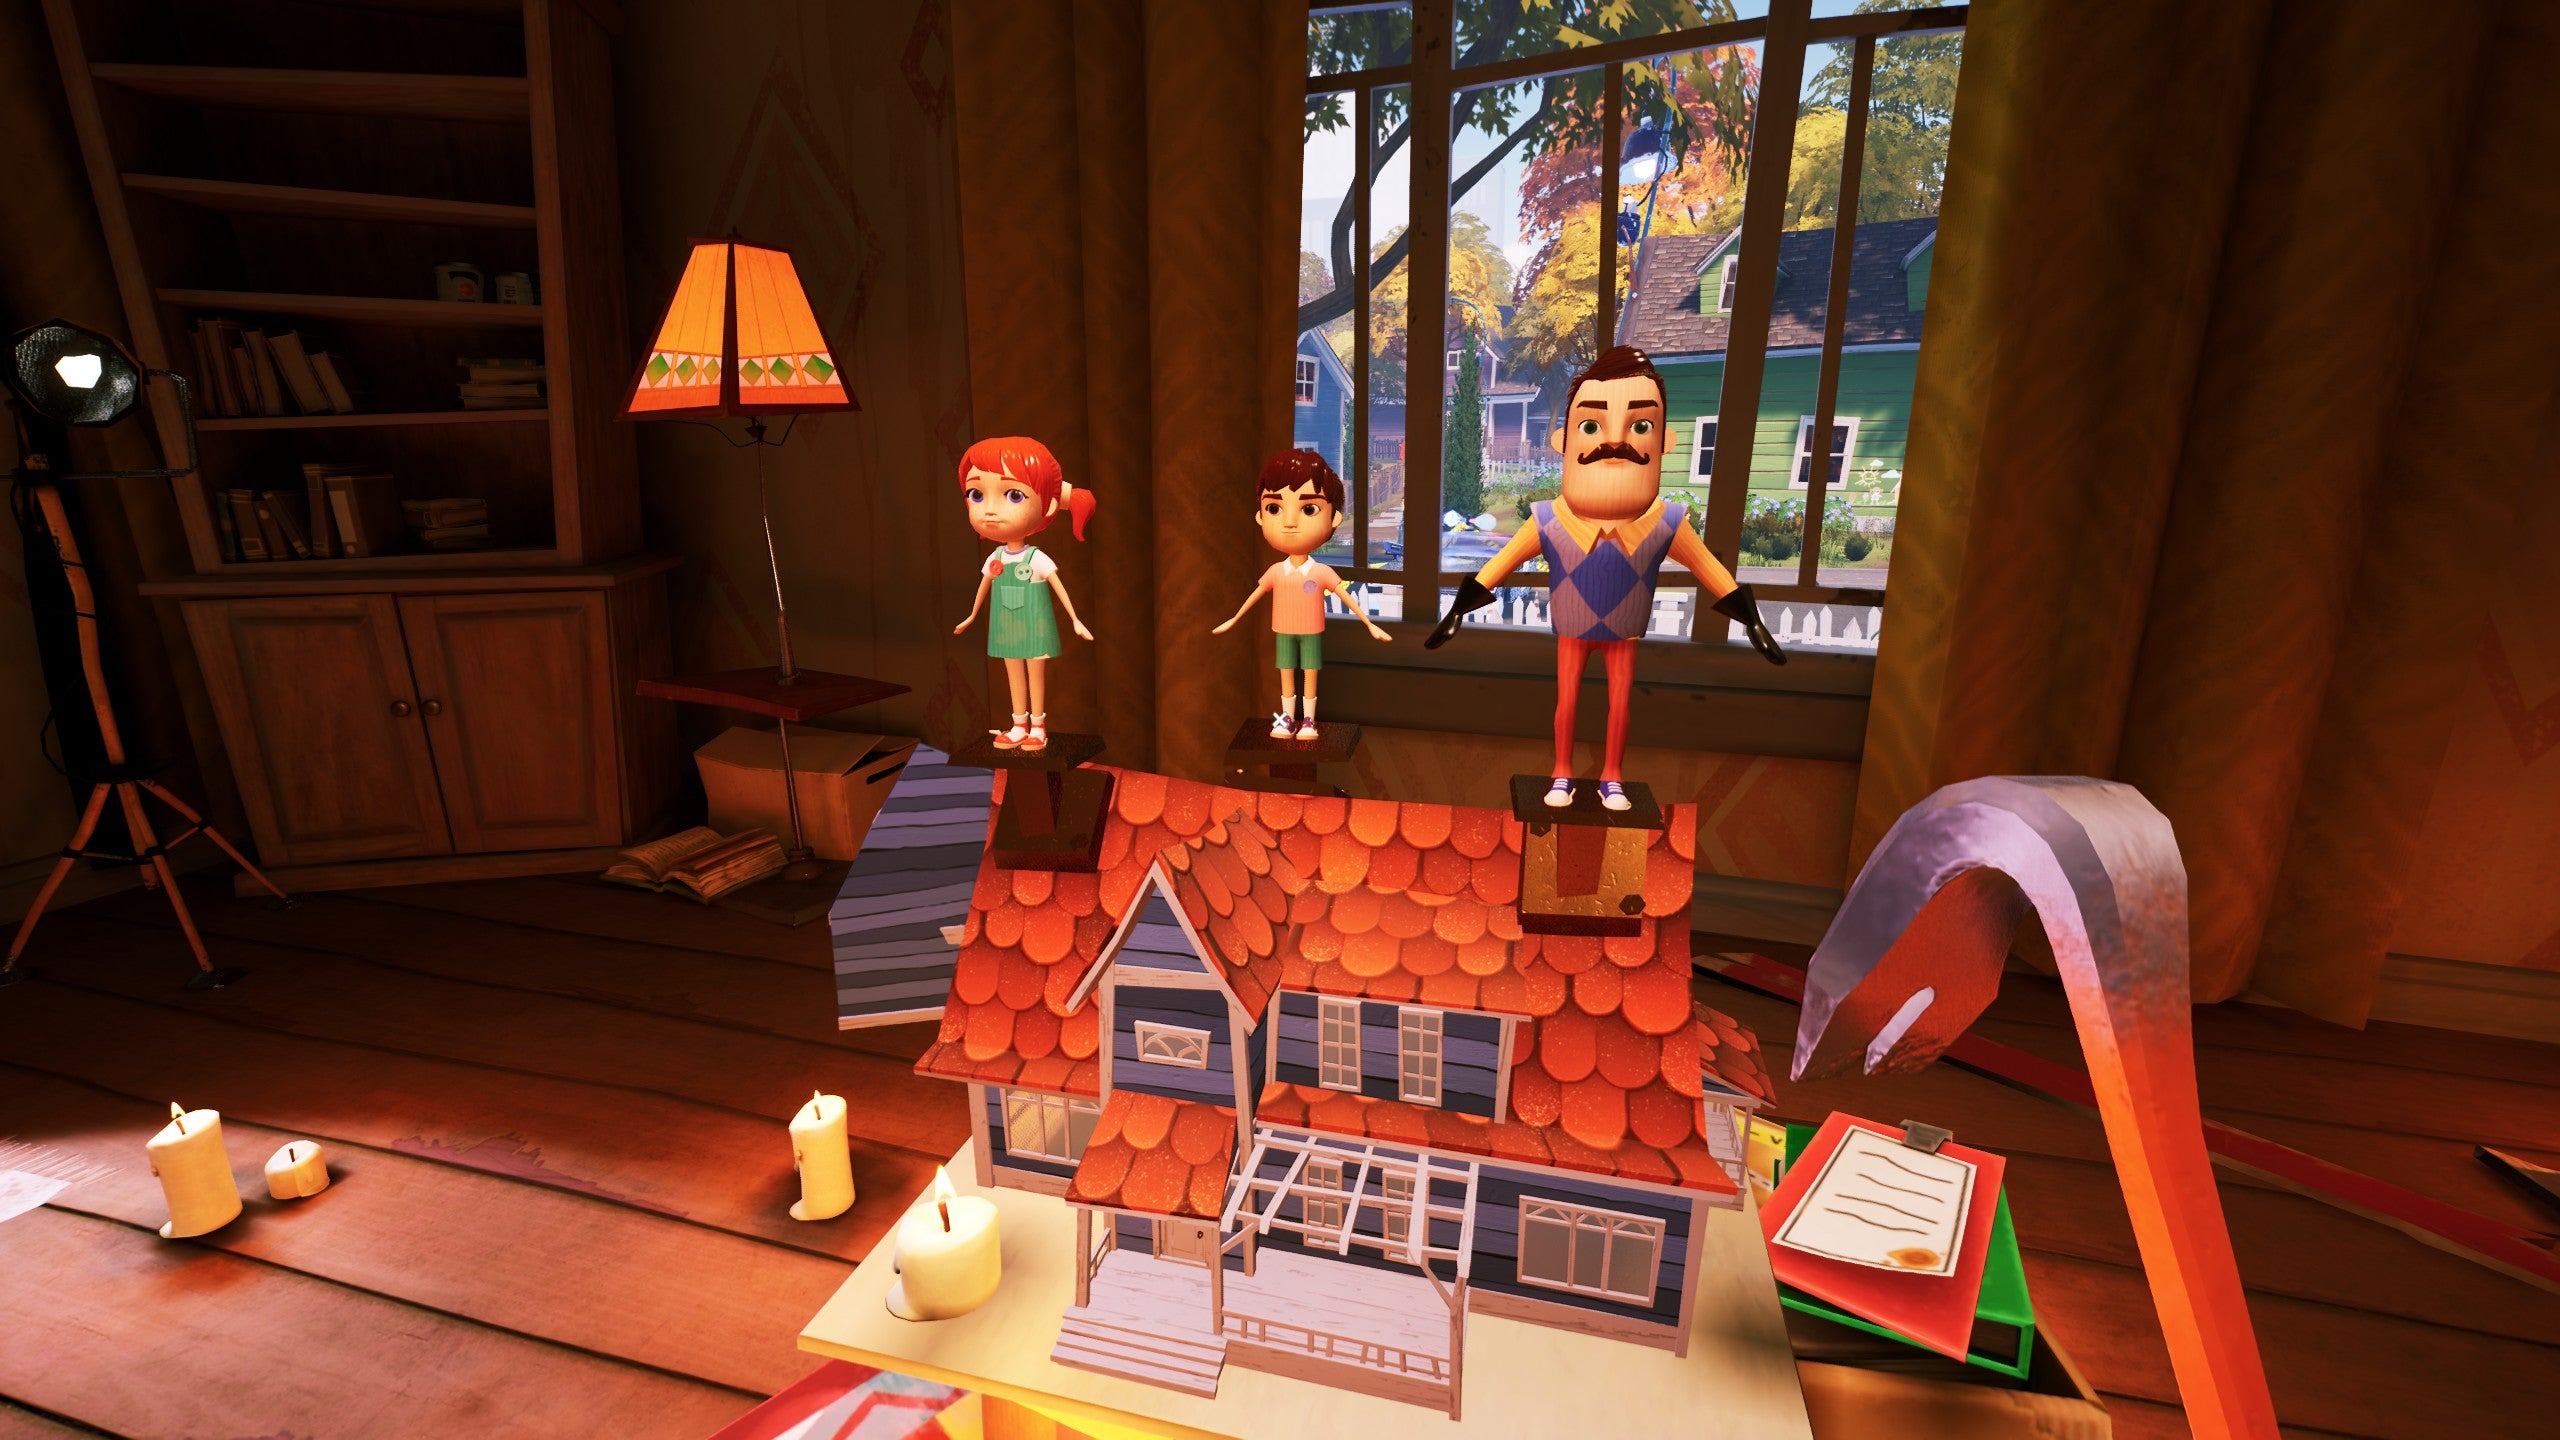 The completed doll house puzzle in Hello Neighbor 2